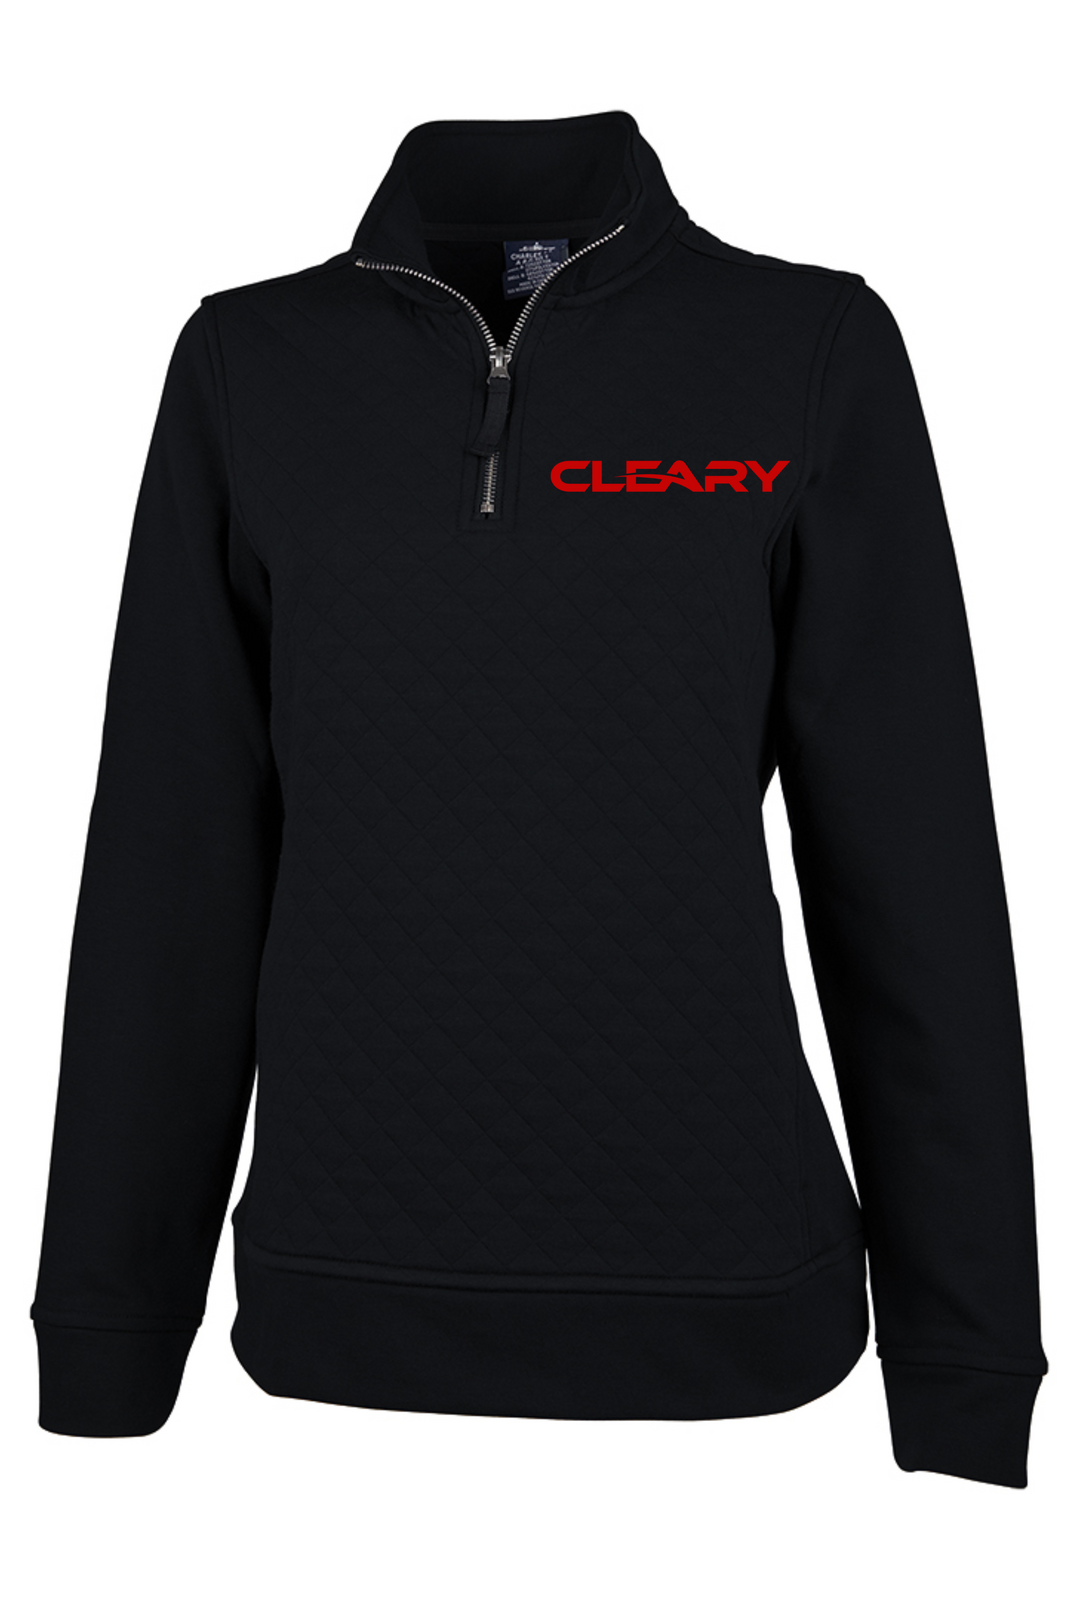 Cleary's Women's Franconia Quilted Pullover Black